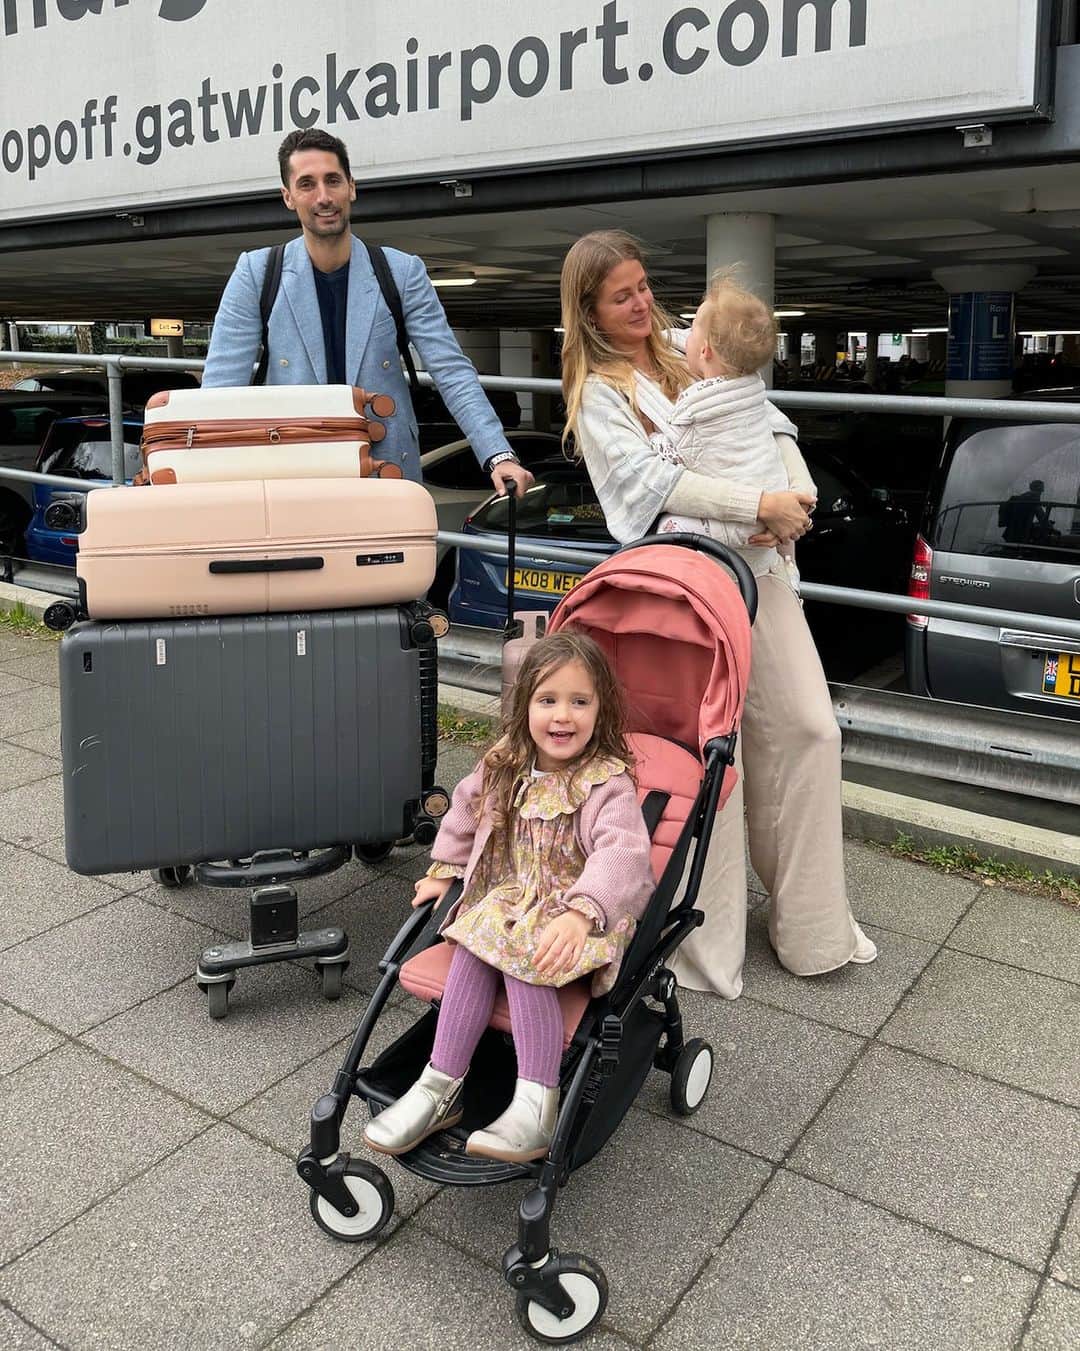 ミリー・マッキントッシュさんのインスタグラム写真 - (ミリー・マッキントッシュInstagram)「We recently embarked on a long-haul trip to Mauritius with our two young kids, and I must admit, I had my concerns. My fear of flying mixed with the thought of travelling with the kids caused quite some anxiety! ✈️ 🫣  Surprisingly, it wasn't as tough as expected. We got to the airport early, giving the girls time to play in the dedicated kid's area, which helped tire them out.   One valuable tip is that a night flight can make all the difference. It matched their sleep schedule, so they slept for over half of the flight. Aurelia is now old enough for her own seat, so we brought inflatable beds that were worth every penny. The girls slept for 8 hours, allowing me to watch a few movies! 🙌🏻  Unfortunately, our return flight got rescheduled to the daytime and it was a lot harder. Spending 12 hours keeping the girls entertained on that plane felt like the LONGEST. DAY. EVER. 🫠  To keep the kids busy, I loaded their iPads with their favorite shows, and I also had sticker and coloring books. The Watercolor books ended up causing a messy mishap, so I wouldn't recommend those! 💧😂  One ESSENTIAL tip: pack extra clothes, and then pack one more set! Aurelia had a major vomiting episode during a bumpy landing, and I ran out of spare outfits. Can you imagine? Passengers around us were retching 🤣. Sometimes, you just have to soldier on!  As I reflect on what worked and what didn't, here are some recommendations for planning a long-haul flight with your children:  1. Arrive early at the airport to let your kids burn energy in the play areas. 2. If possible, choose night flights that match their sleep schedule. 3. Pack iPads with their favourite shows and mess-free activities. 4. Bring extra outfits - accidents can happen. 5. Consider inflatable beds for overnight flights - we used @flyaway.designs (check airline approval first). 6. Don't stress about others' opinions; kids can have moments you can't control!  The journey had its challenging moments, but it turned out to be much smoother than I first feared. All we can talk about now is how much we loved our family holiday. If you have any questions, feel free to ask in the comments and save for tips on your next trip💗」1月8日 17時00分 - milliemackintosh